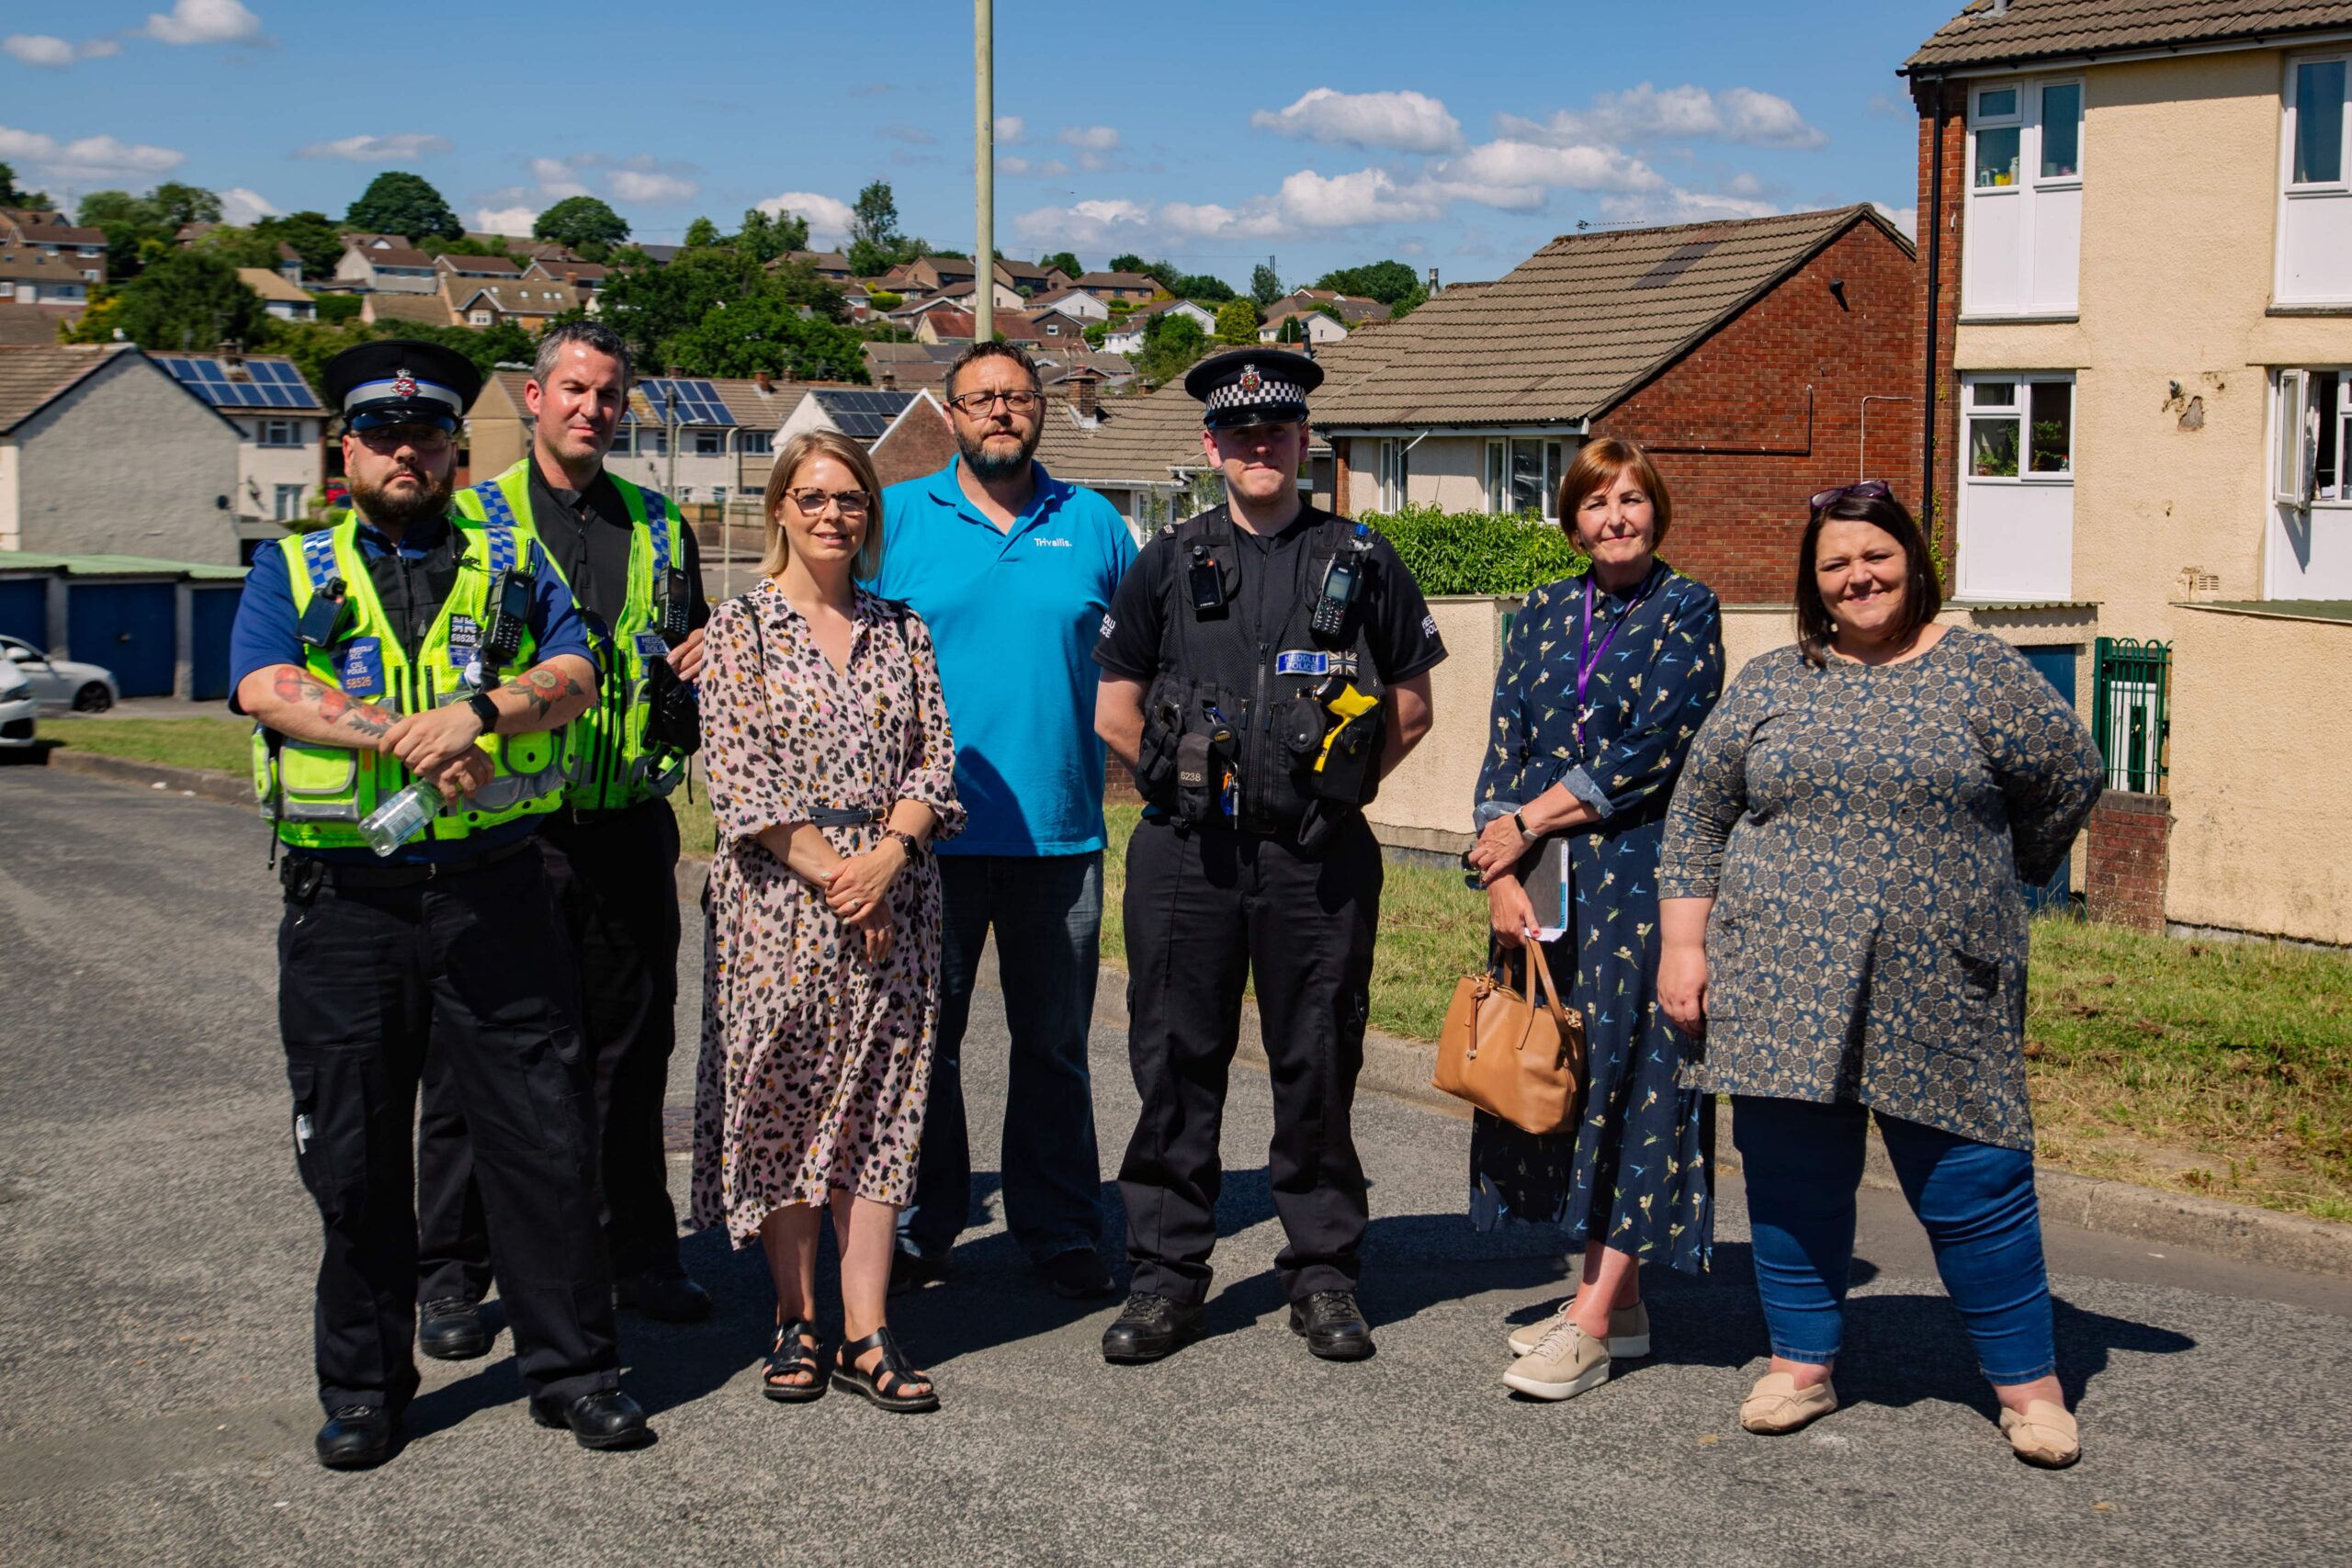 Trivallis Housing Landlord Wales A group of Trivallis Community Housing members standing together on a residential street on a sunny day, including police officers and civilians likely collaborating on a local safety or neighborhood initiative.